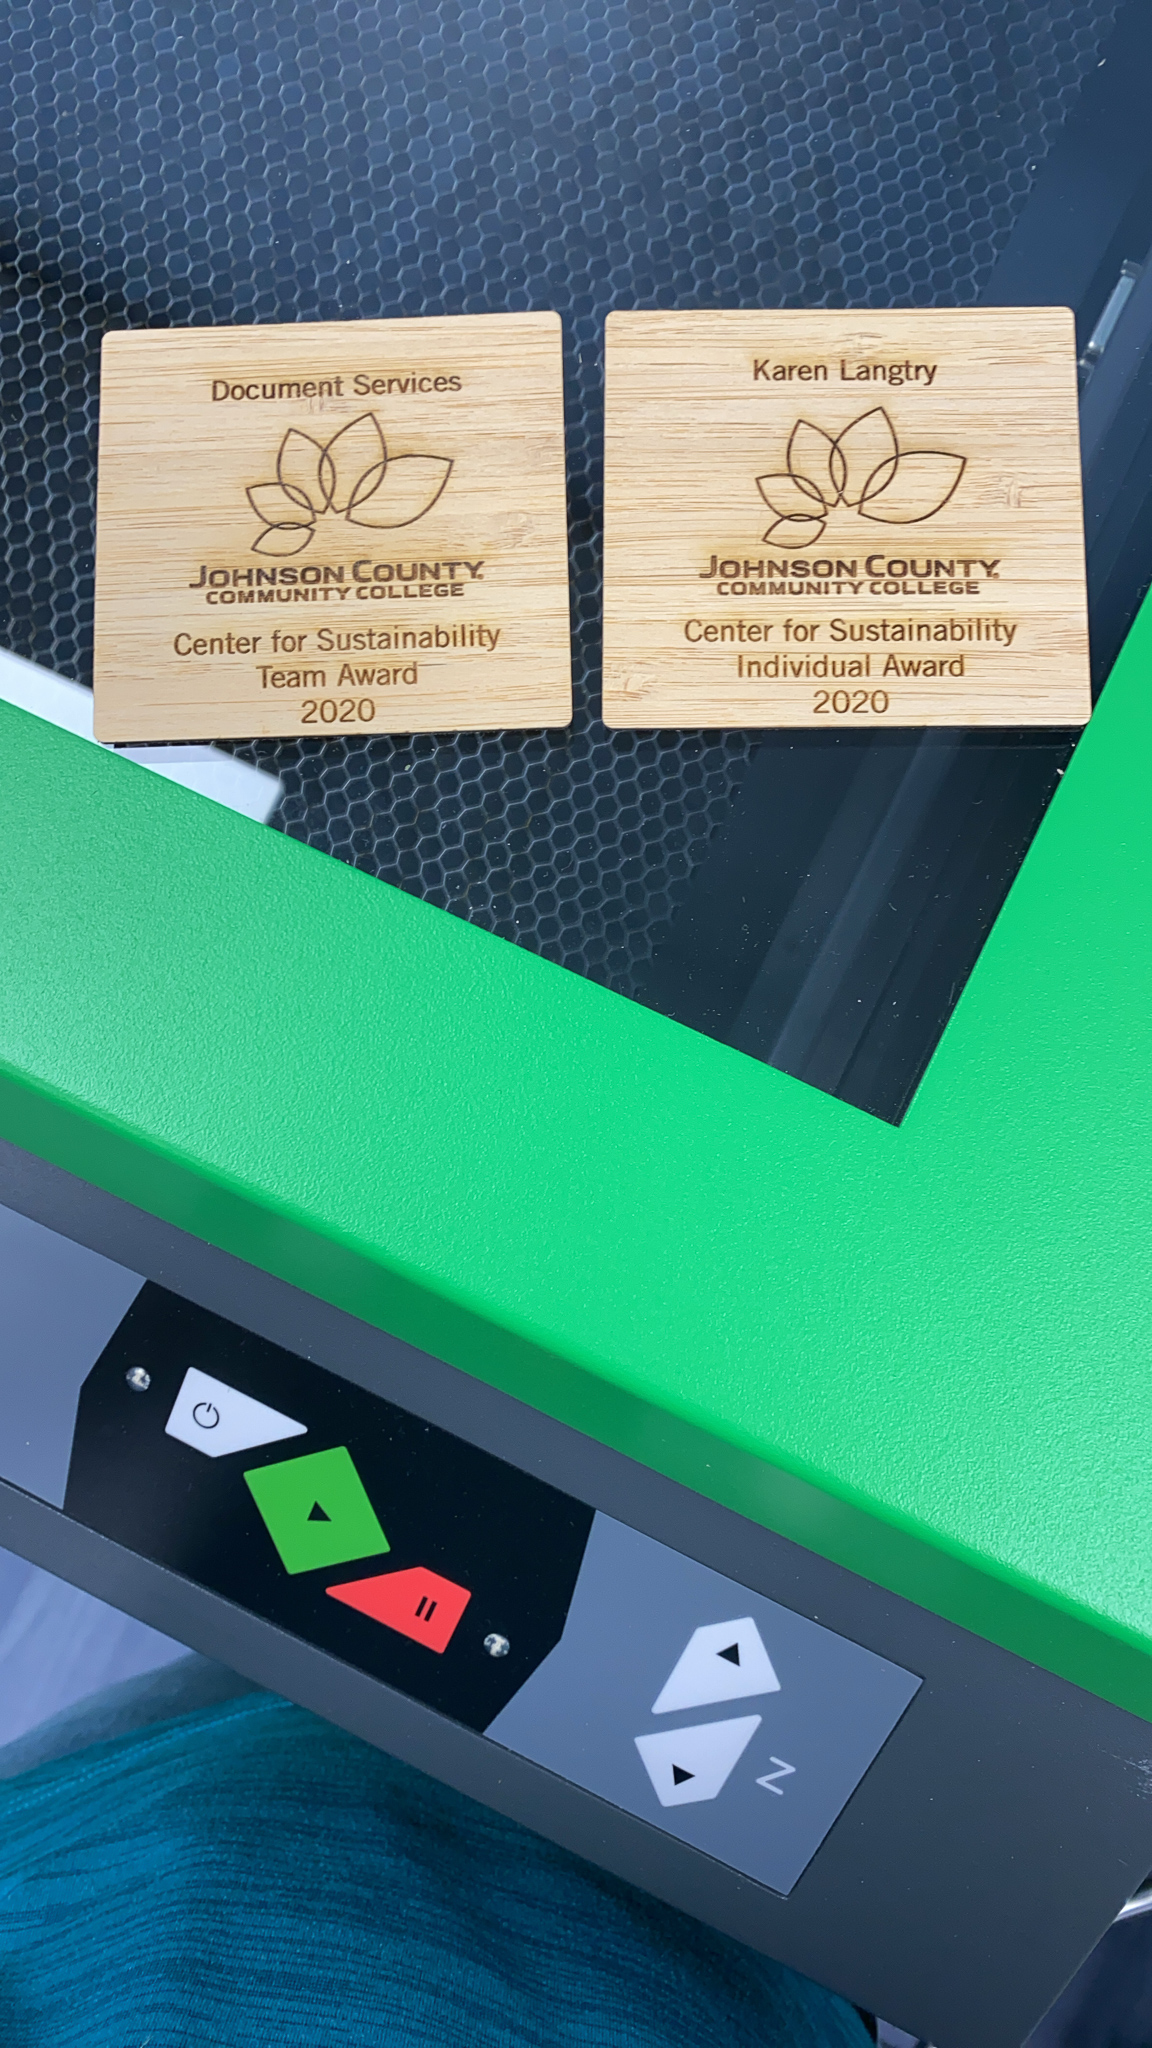 Award Plaques on Bamboo - Laser Cutter